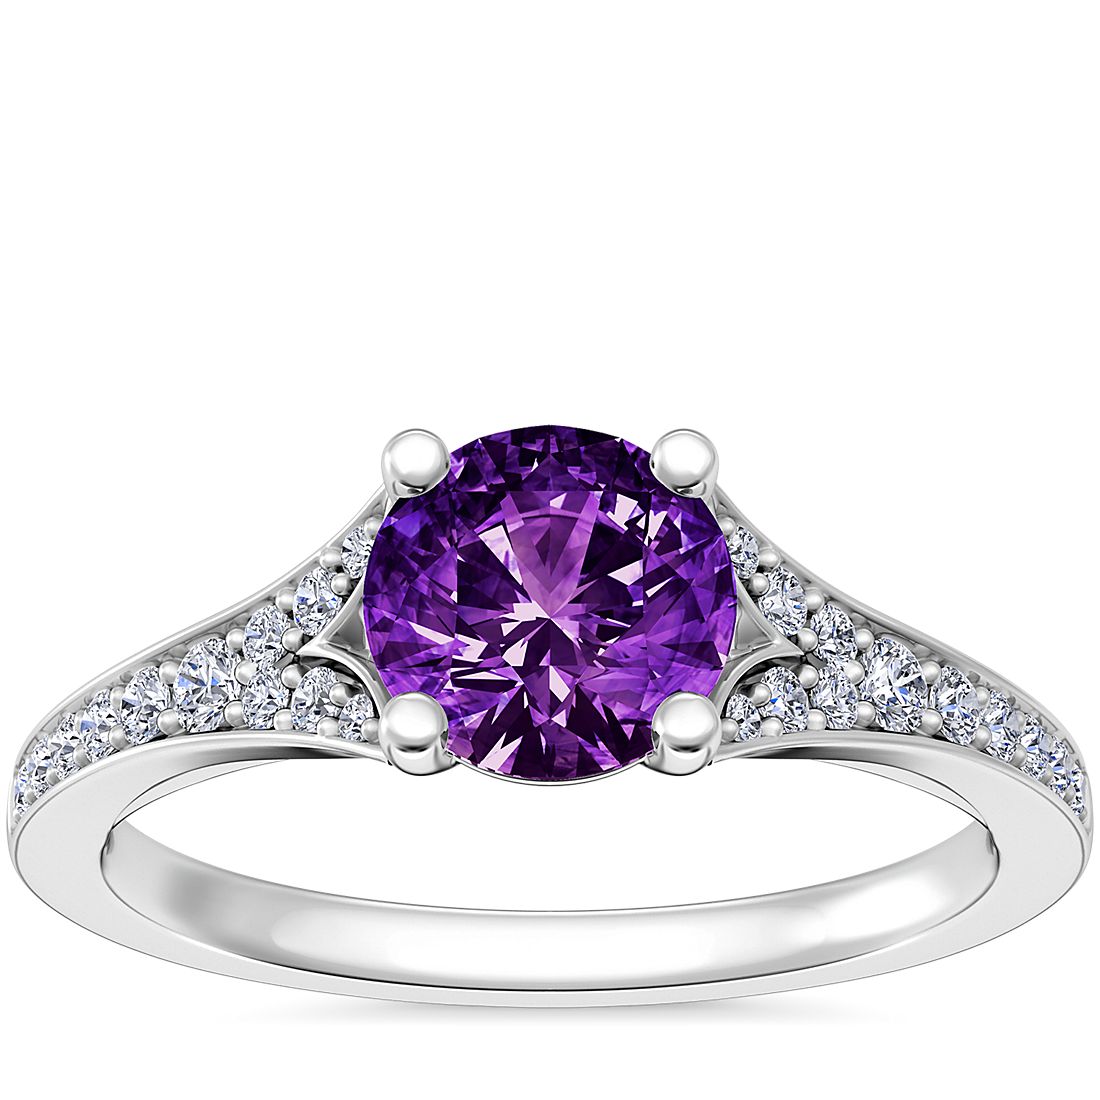 Petite Split Shank Pavé Cathedral Engagement Ring with Round Amethyst in Platinum (6.5mm)